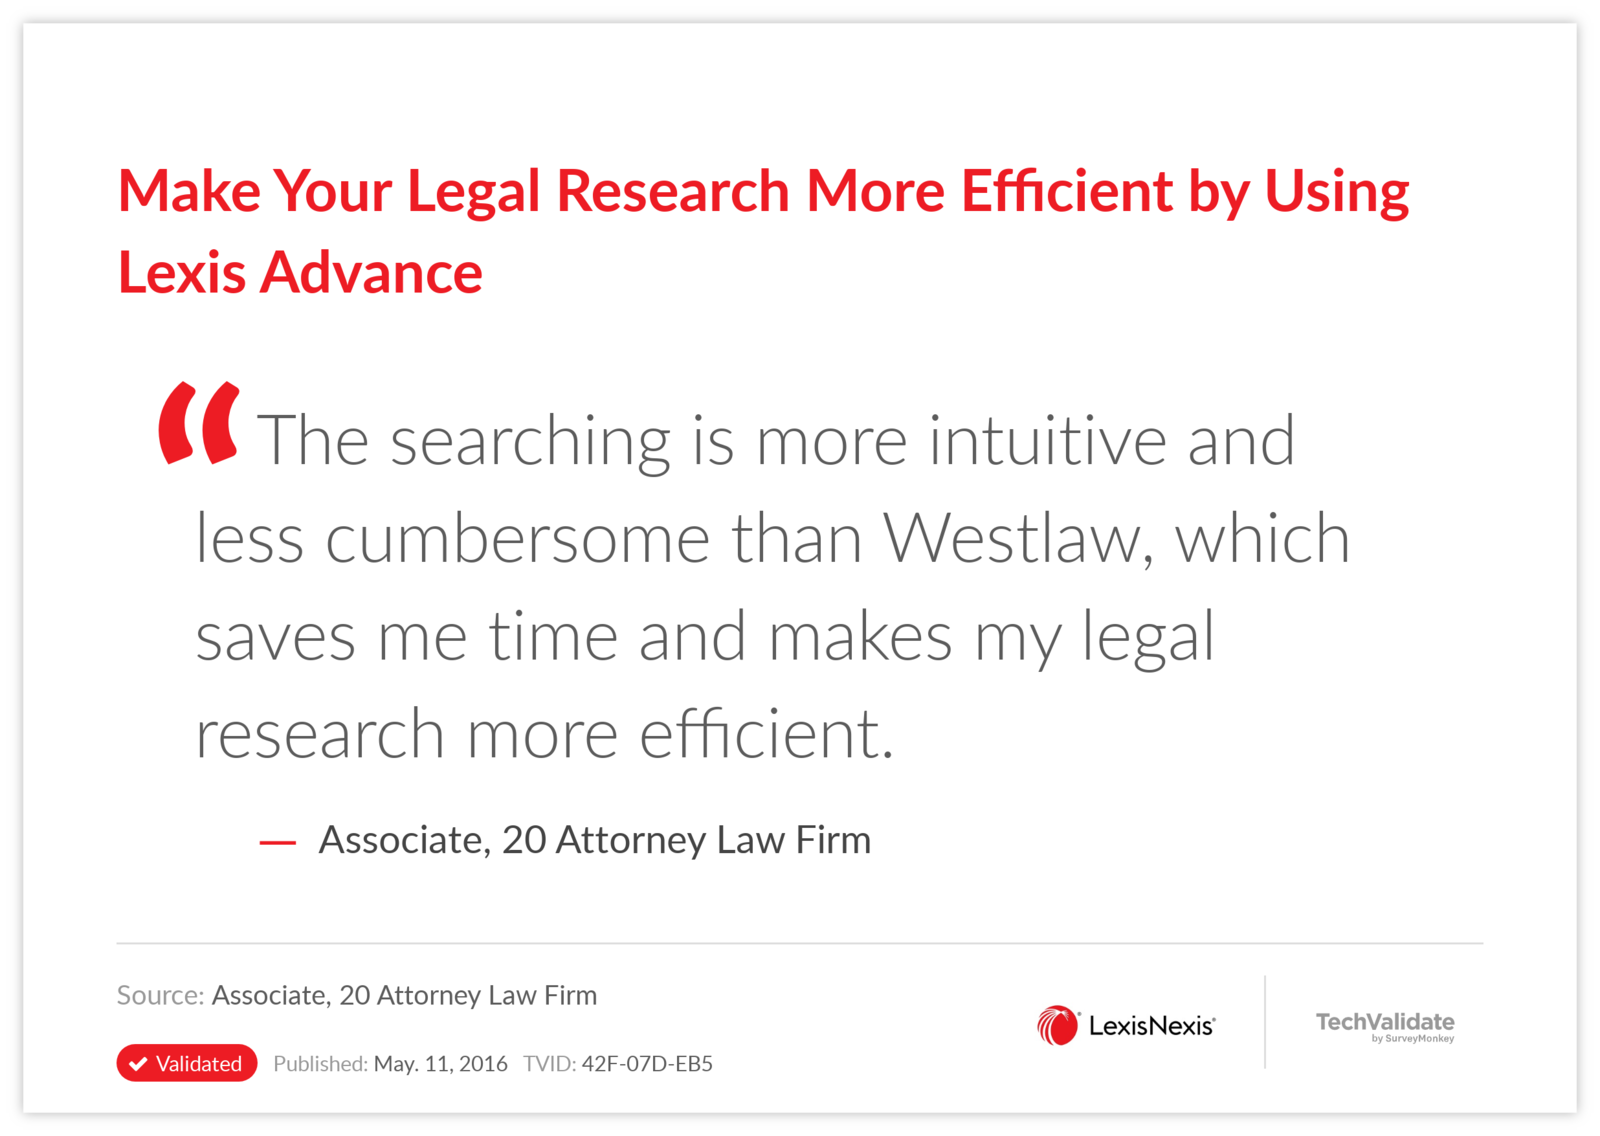 Make Your Legal Research More Efficient by Using Lexis Advance